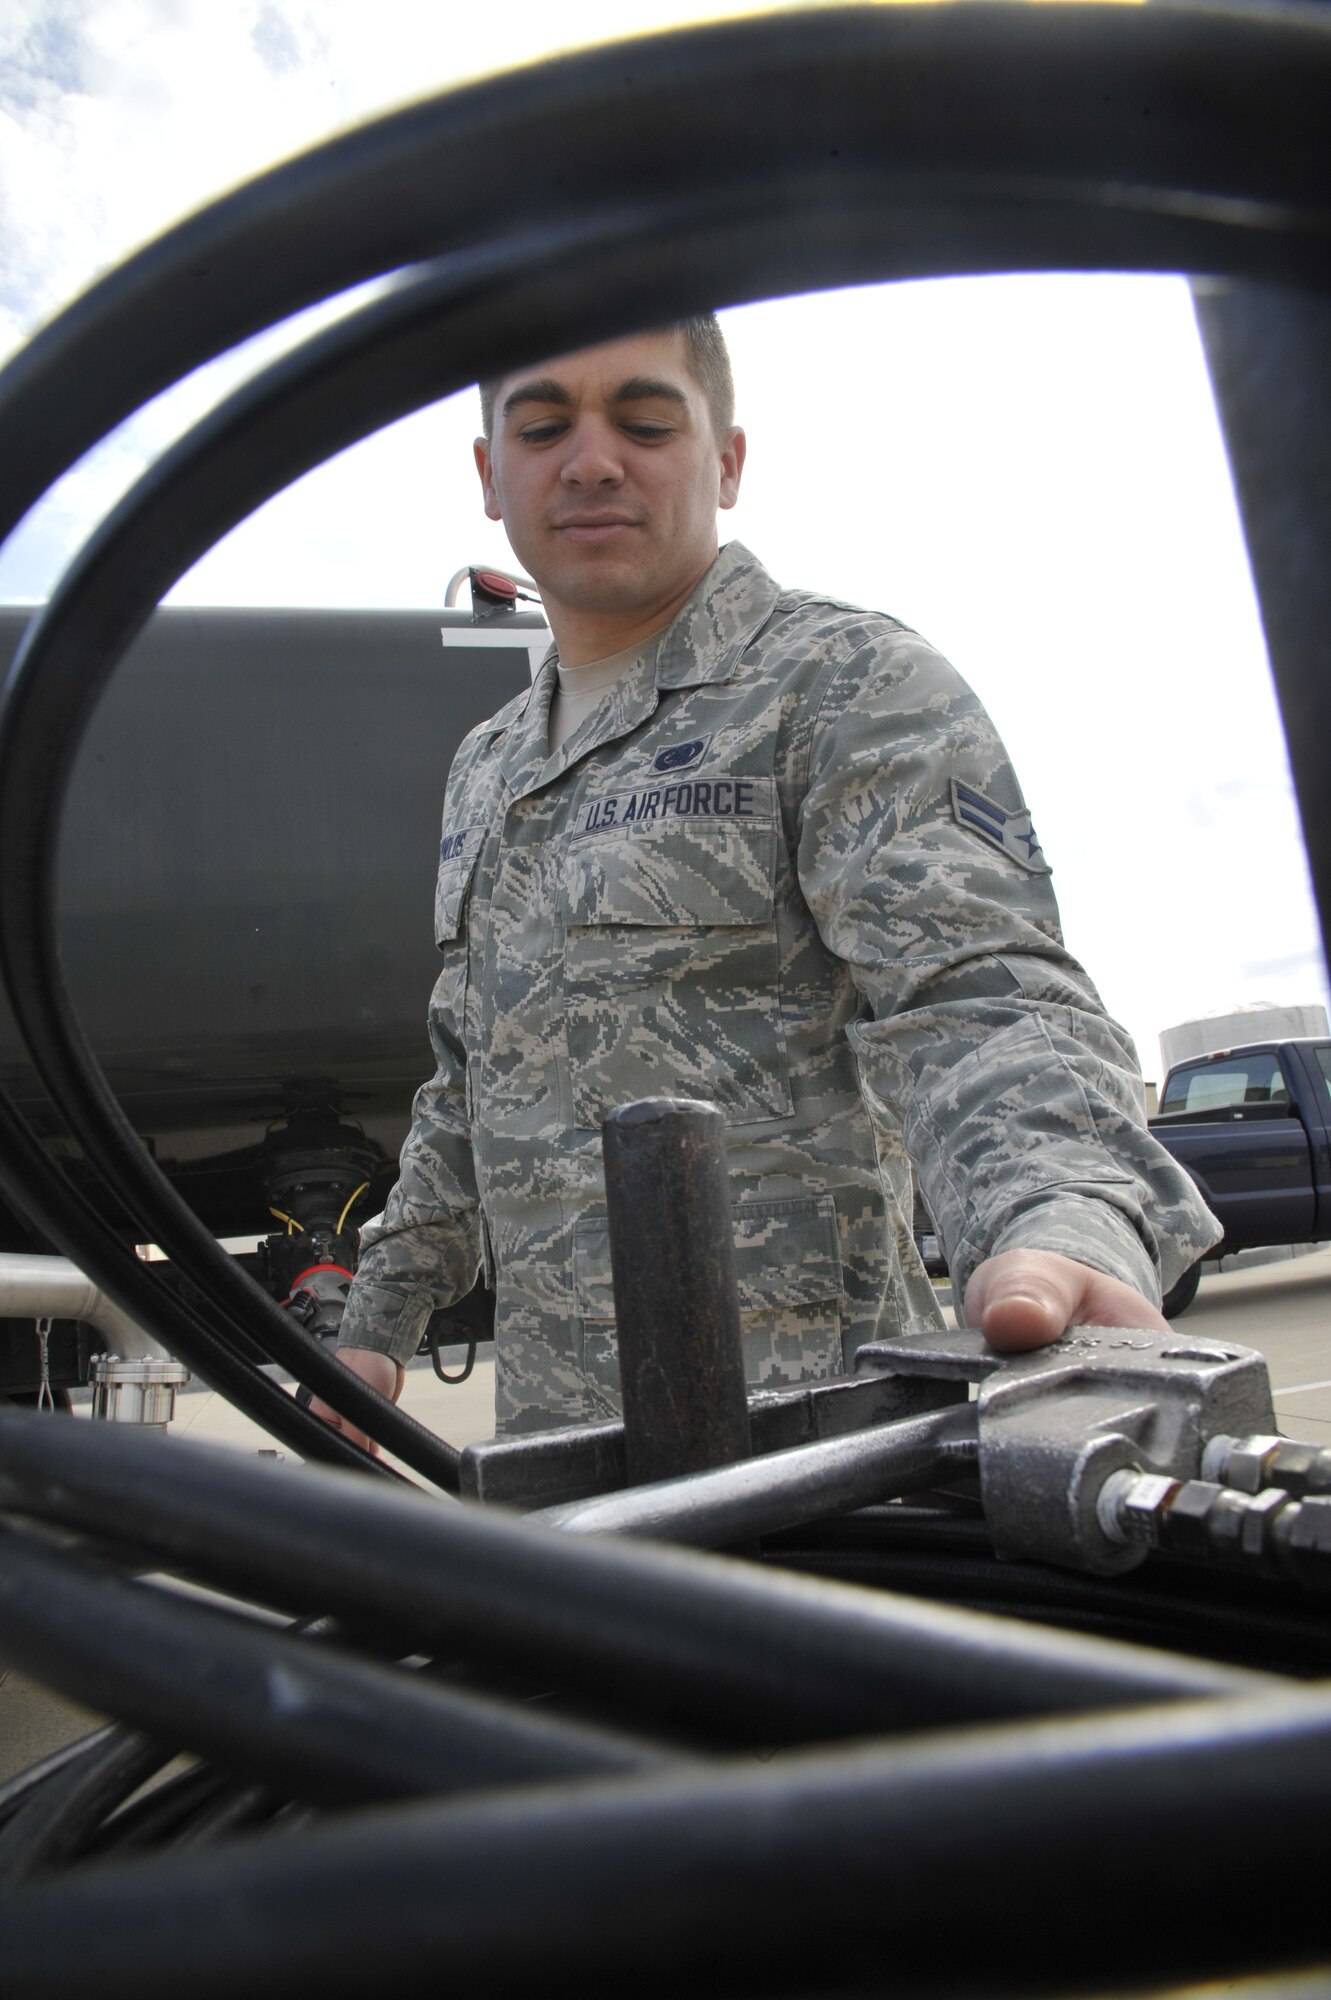 U.S. Air Force Airman 1st Class Joshua Reynolds, 509th Logistics Readiness Squadron fuels distribution technician, puts down a hose reel at Whiteman Air Force Base, Mo. April 1, 2014.  The reel is used to “run “the hose back into the R11 truck for safe and security purposes. (U.S. Air Force photo by Airman 1st Class Keenan Berry/Released)  